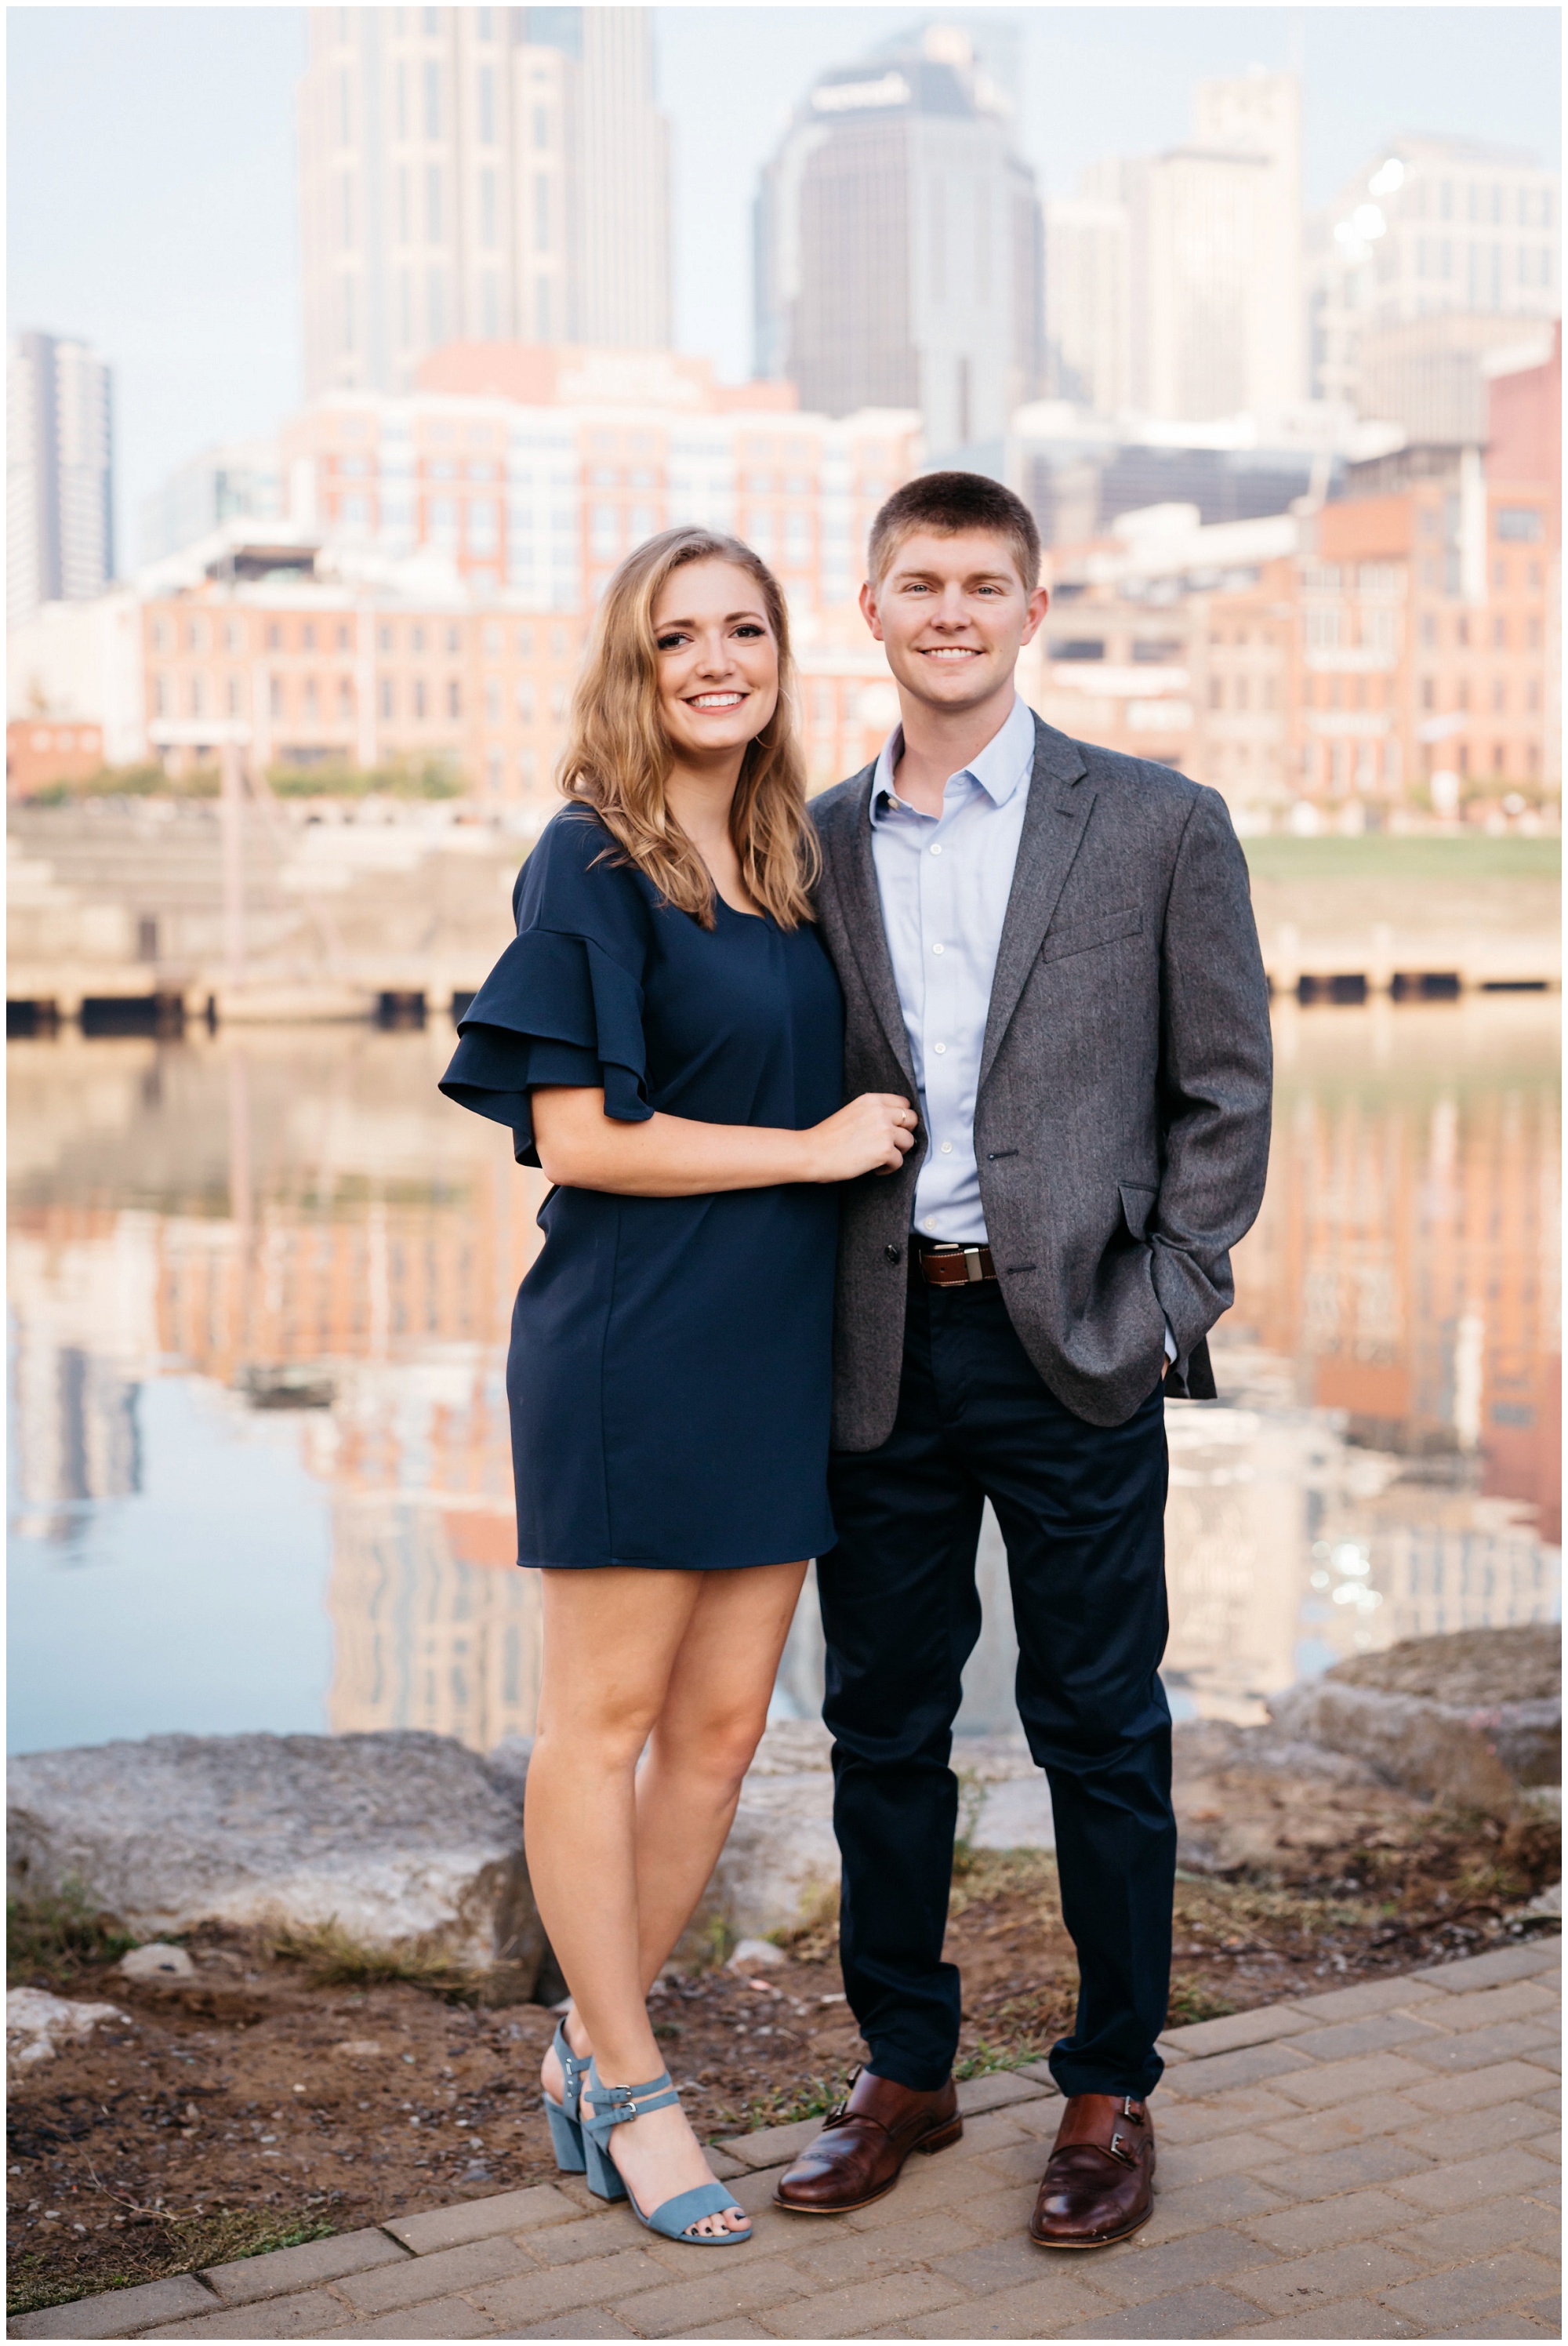 Nashville Engagement Photos from a downtown Nashville engagement session by wedding photographer Meredith Teasley